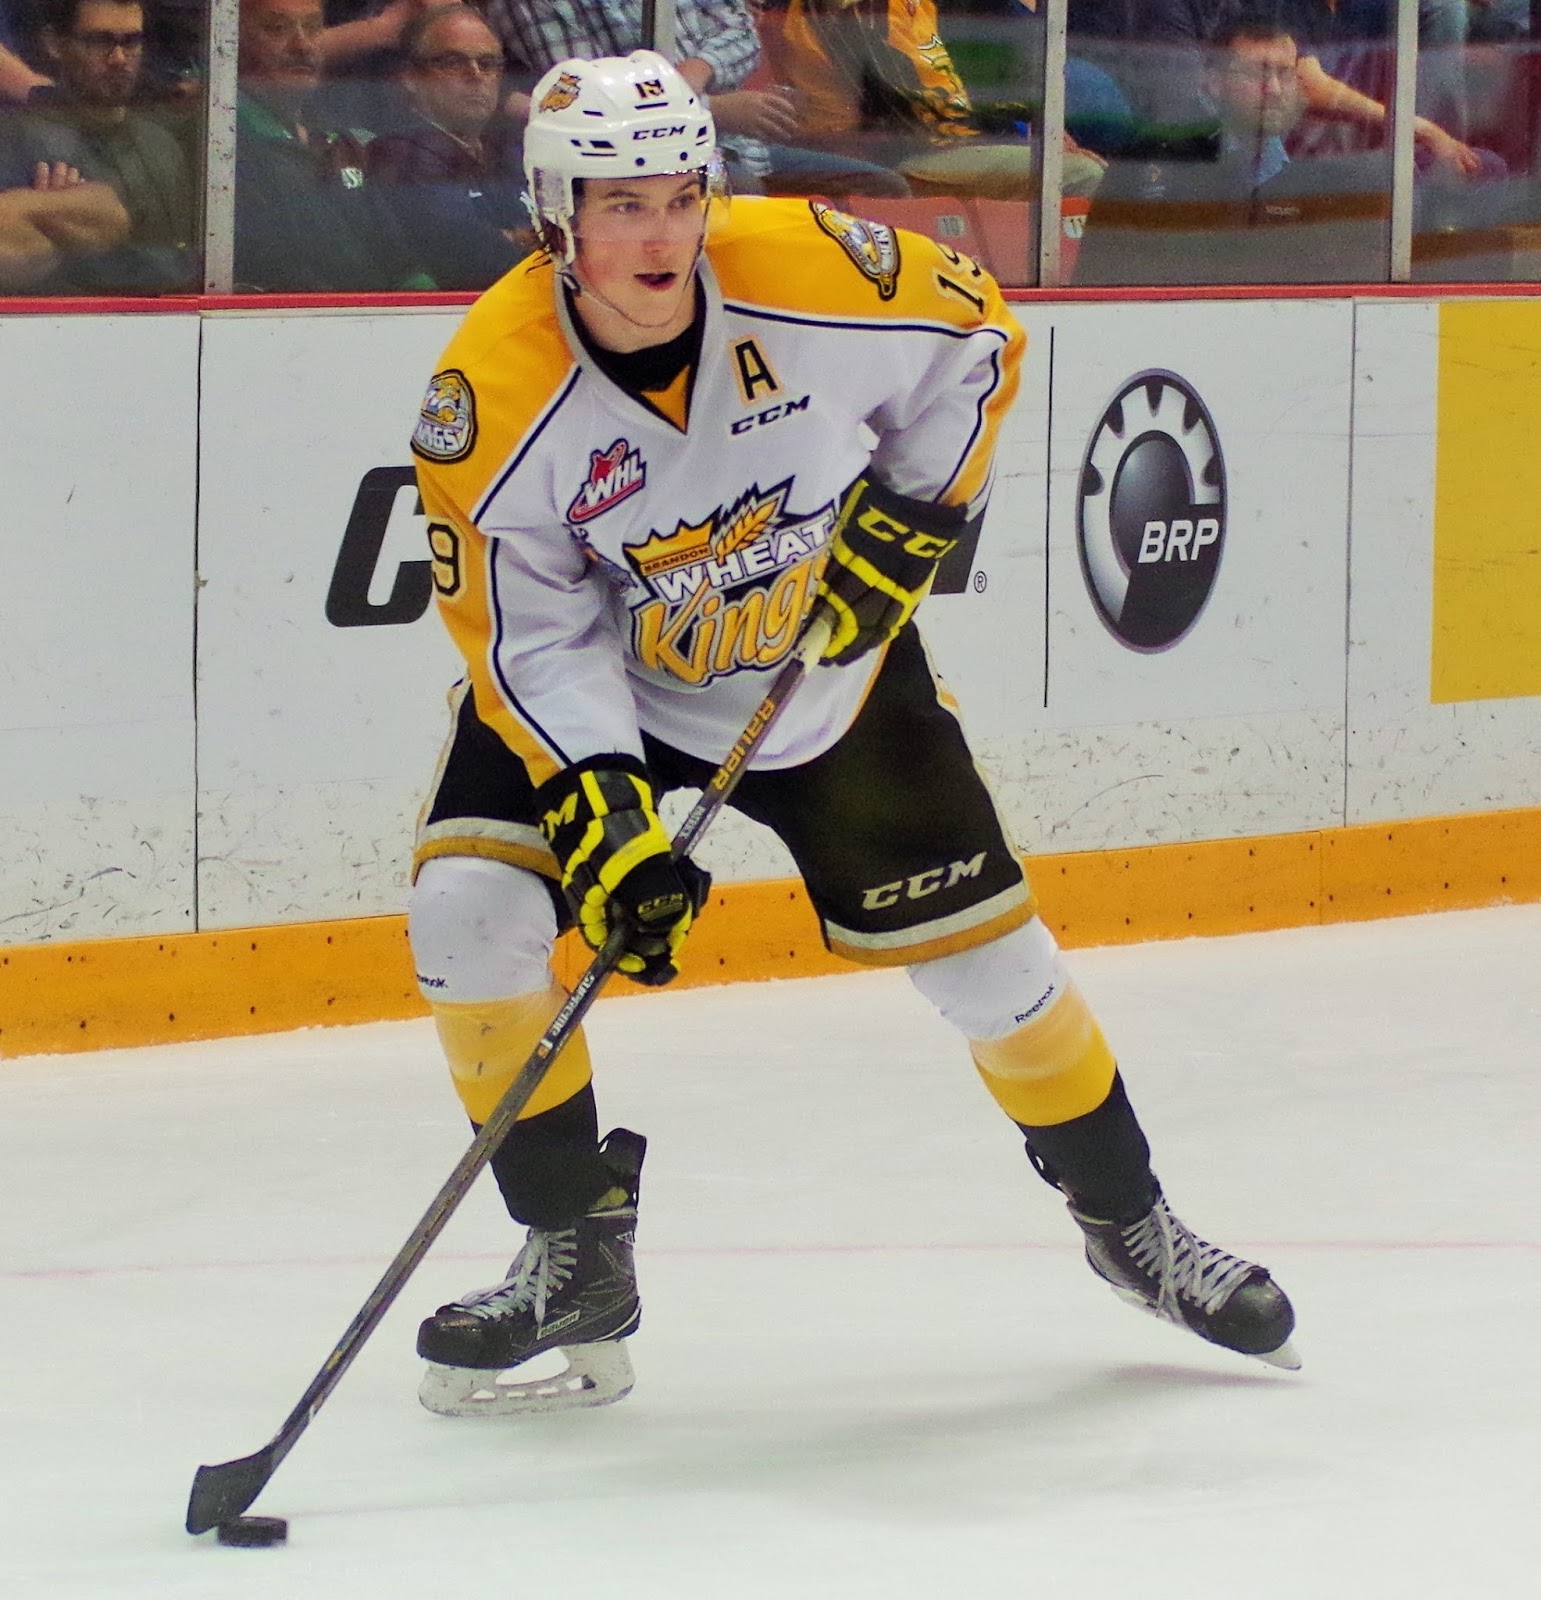 Stars standout, Henry signs with WHL's Wheat Kings